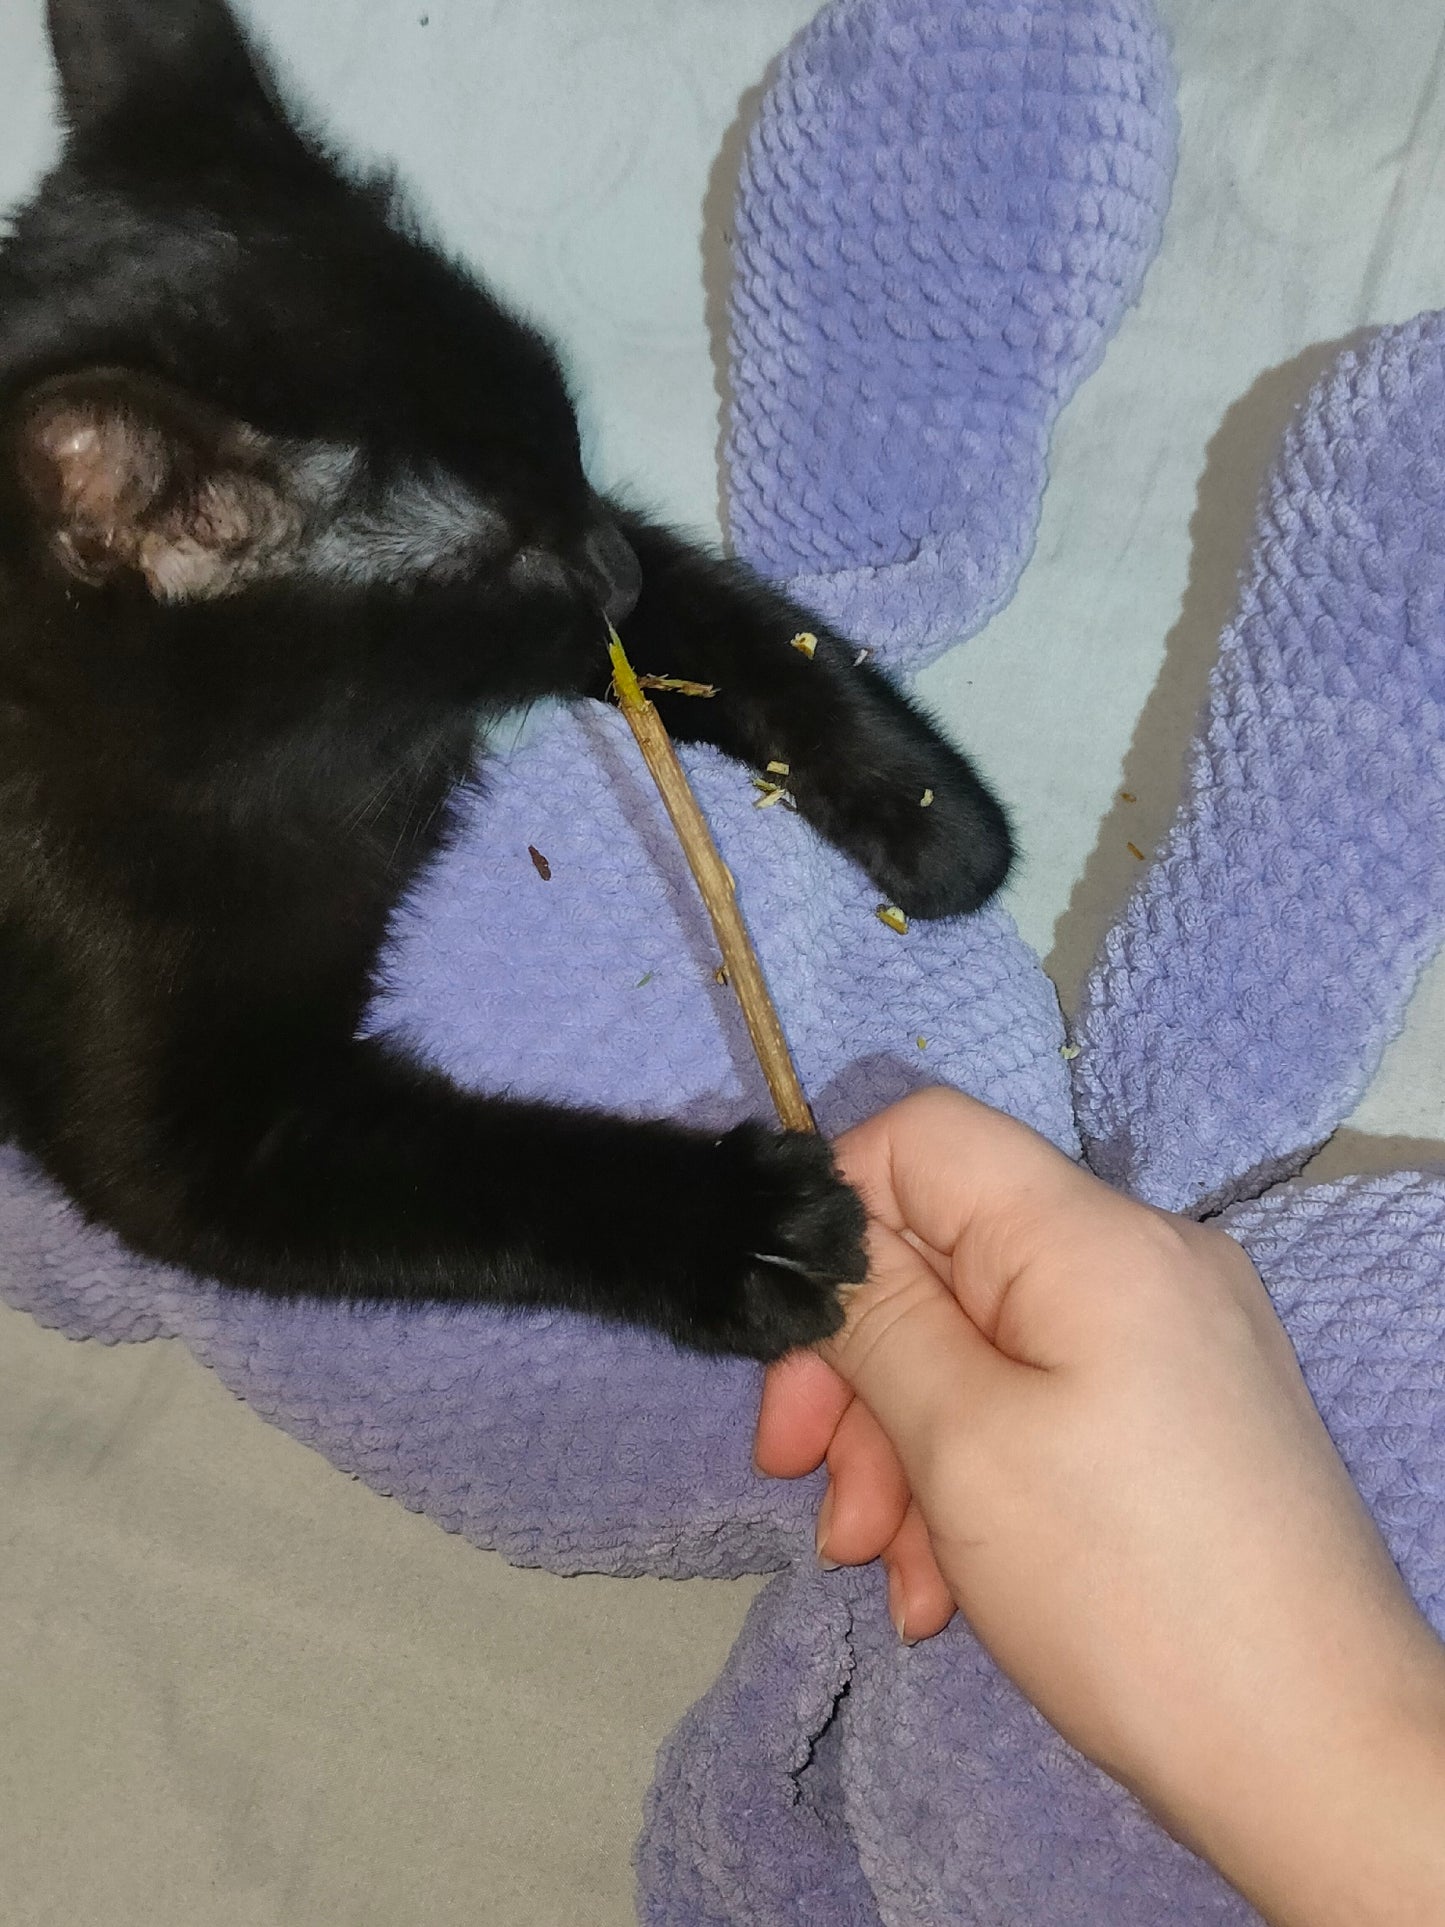 Catnip Natural Chew Stick for Cats